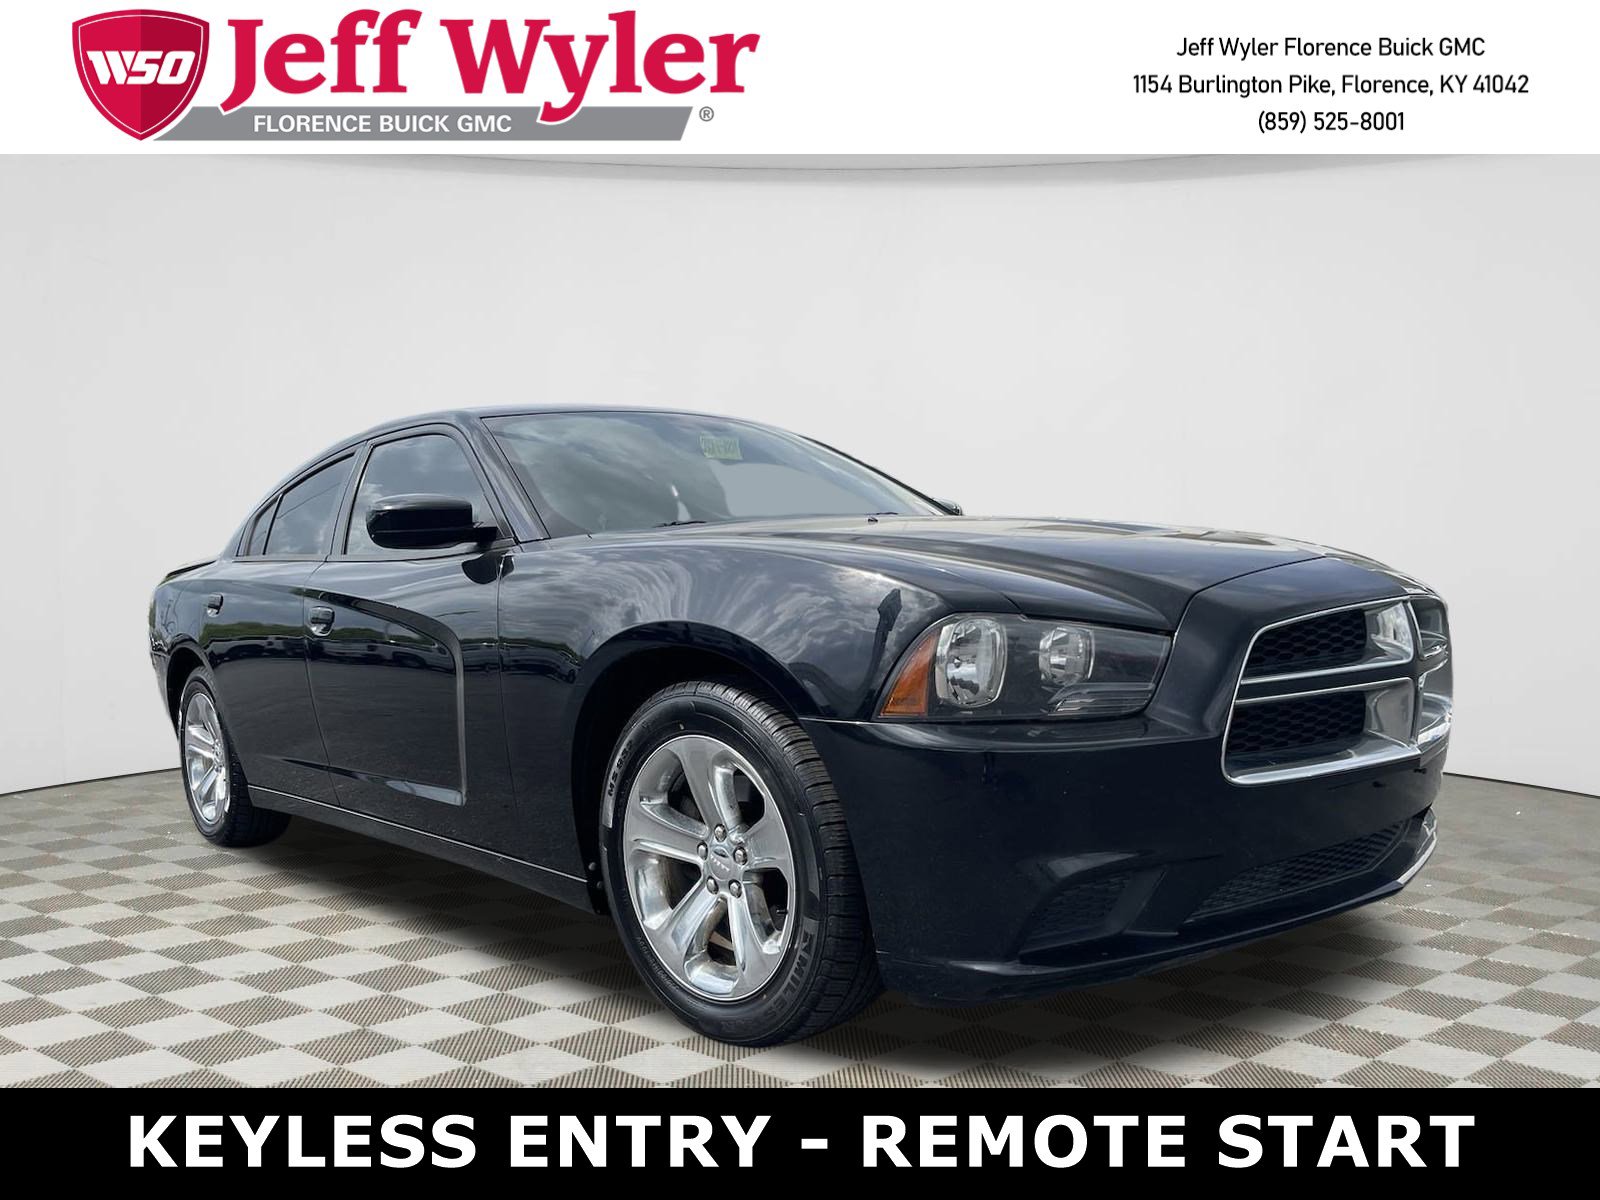 2013 Dodge Charger Florence KY